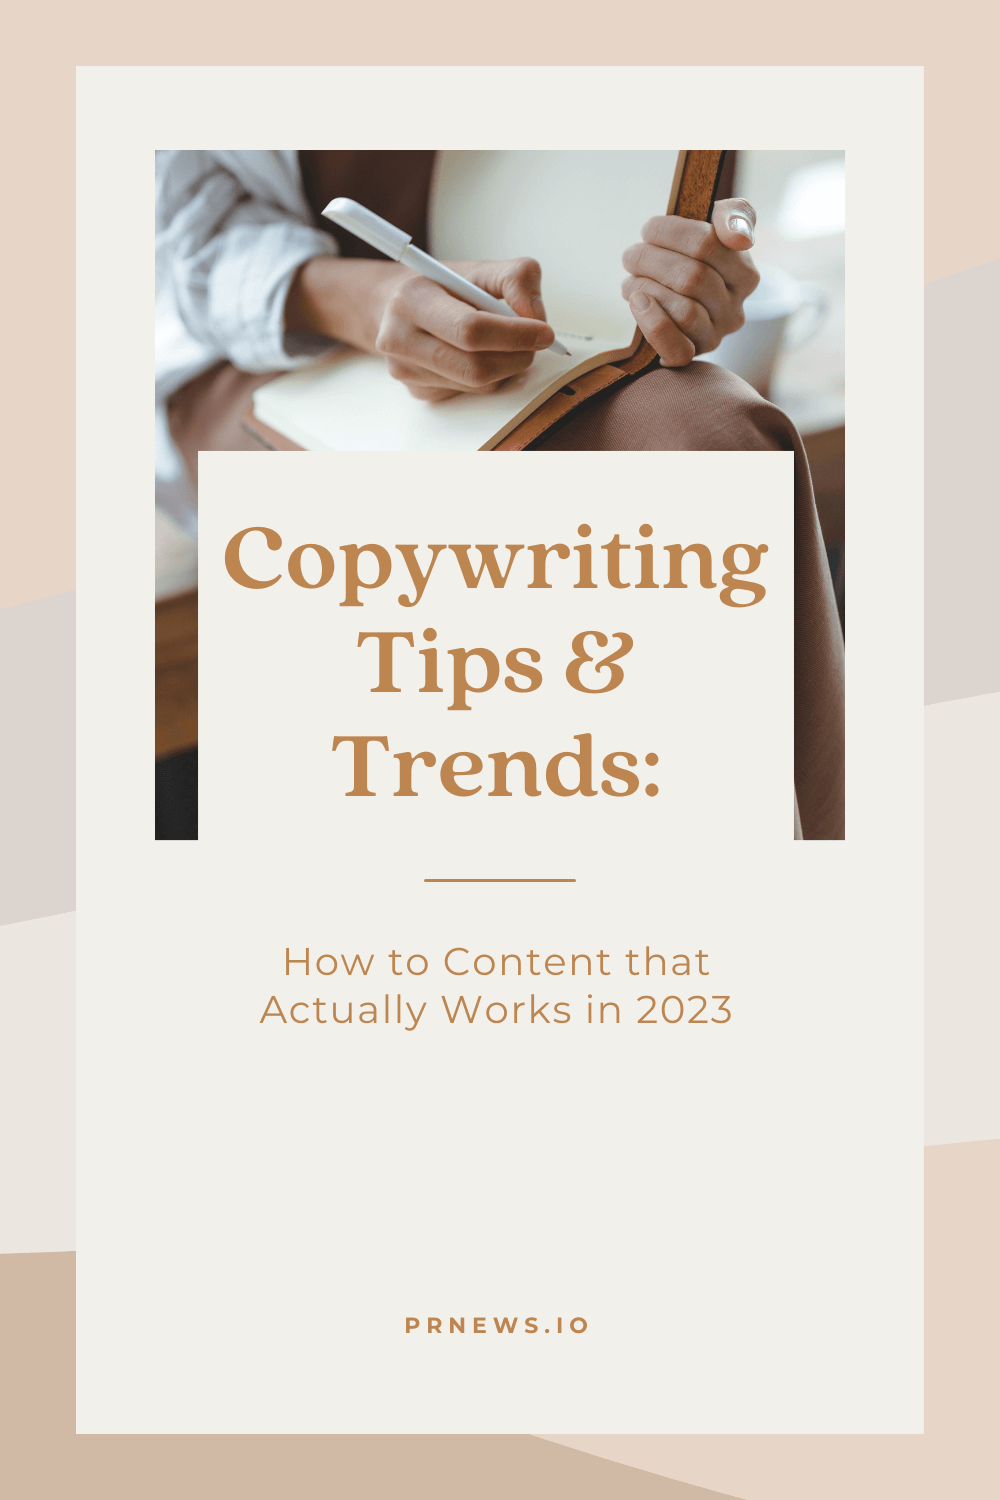 Copywriting Tips & Trends: How to Content that Actually Works in 2022